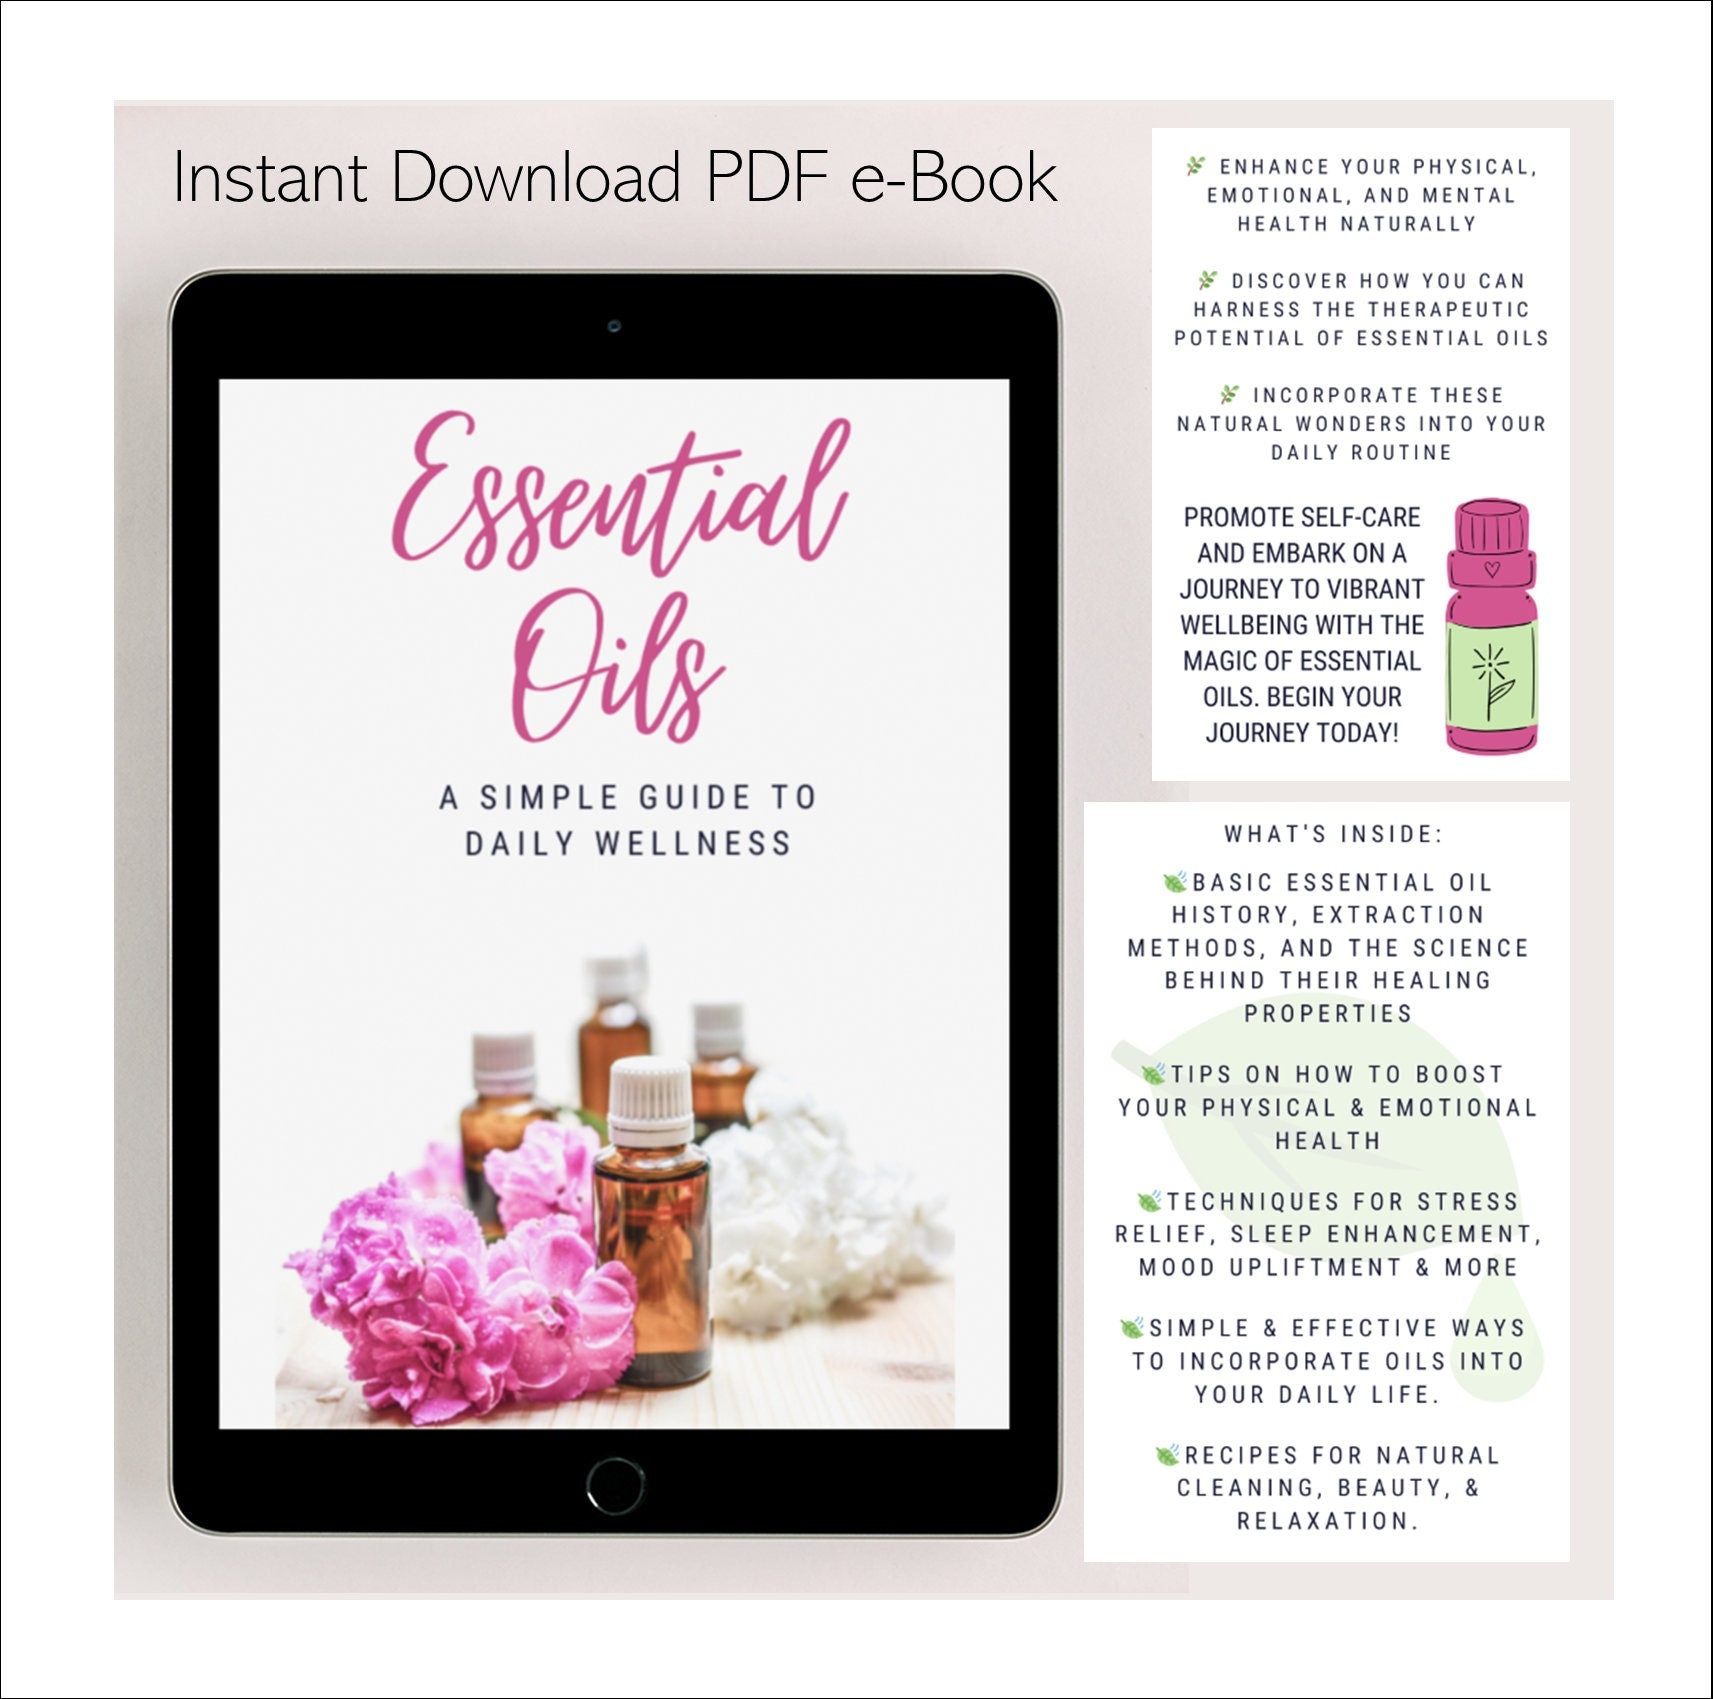 Essential Oils A Simple Guide to Daily Wellness e-book. Beginner's Guide  Natural Wellness Essential Oils, Recipes and Practical Tips 